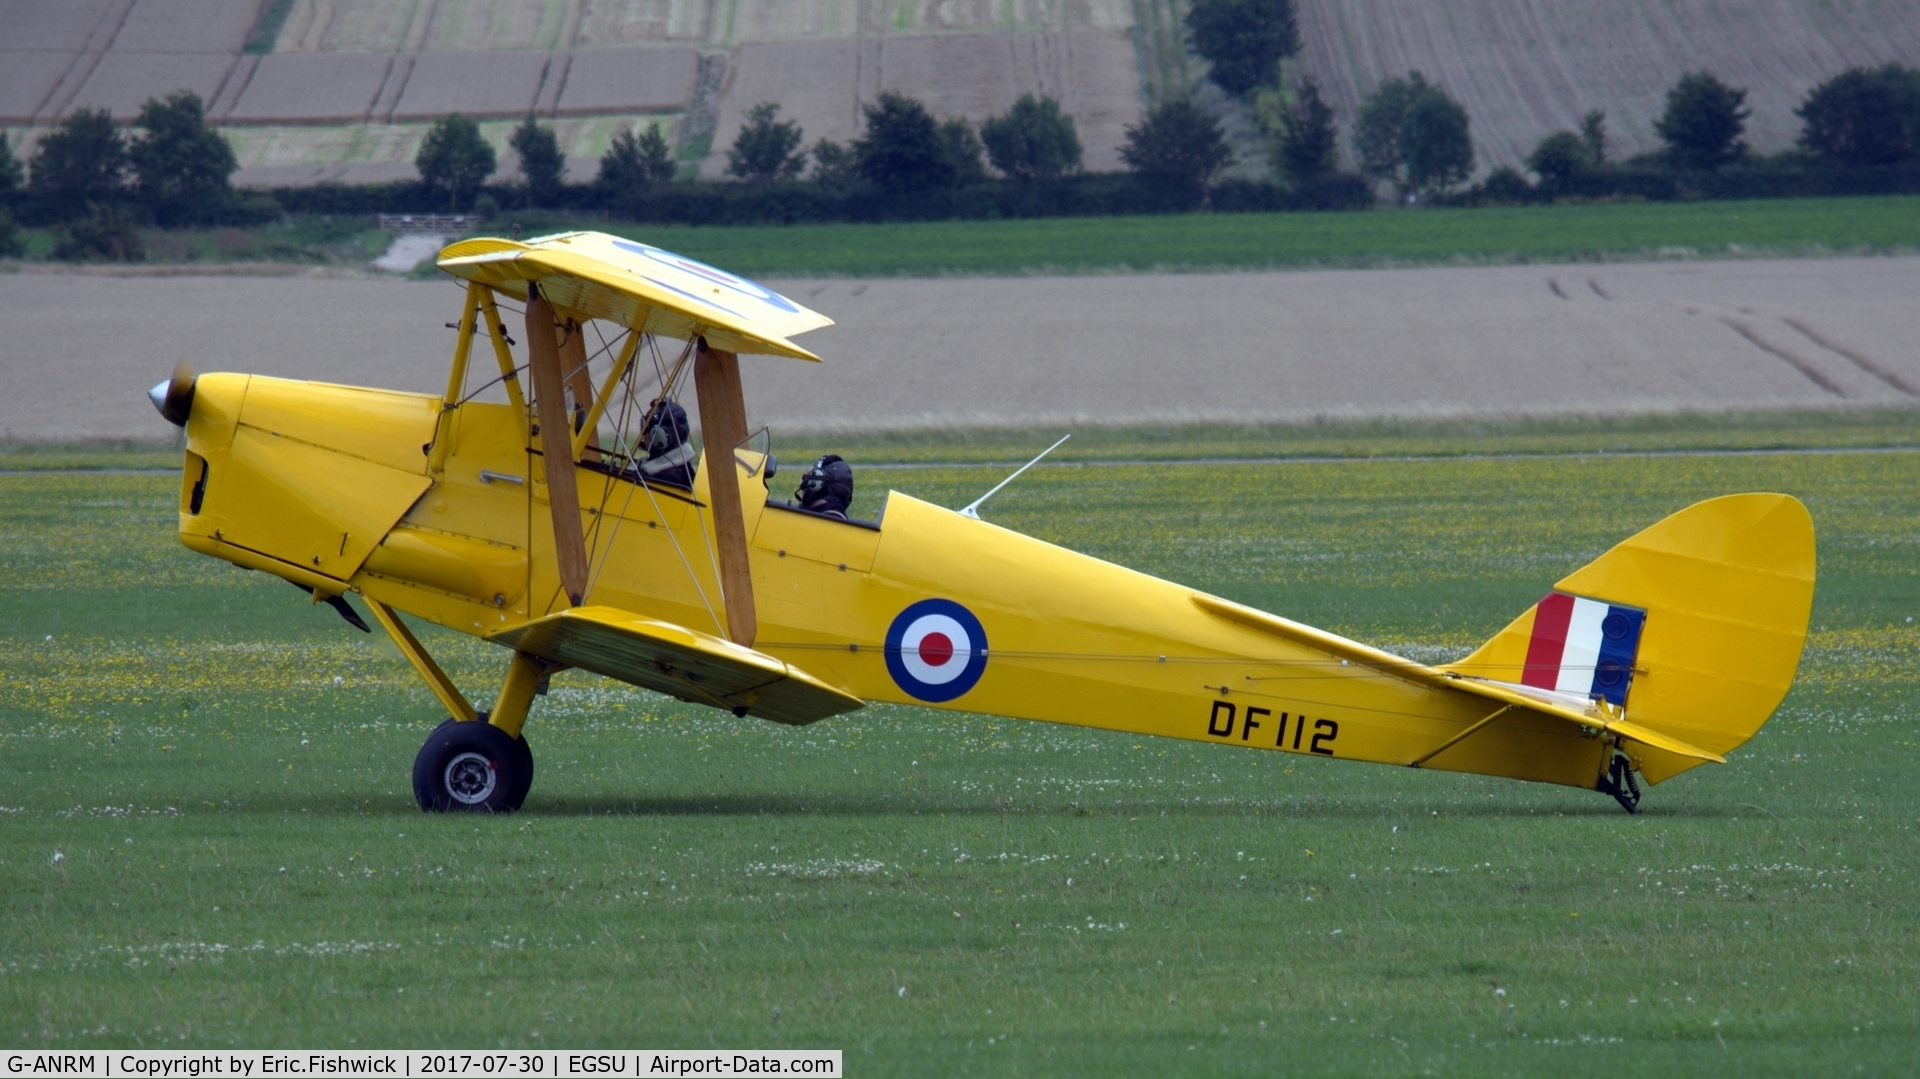 G-ANRM, 1942 De Havilland DH-82A Tiger Moth II C/N 85861, 1x. G-ANRM at The Imperial War Museum, Duxford, July, 2017.